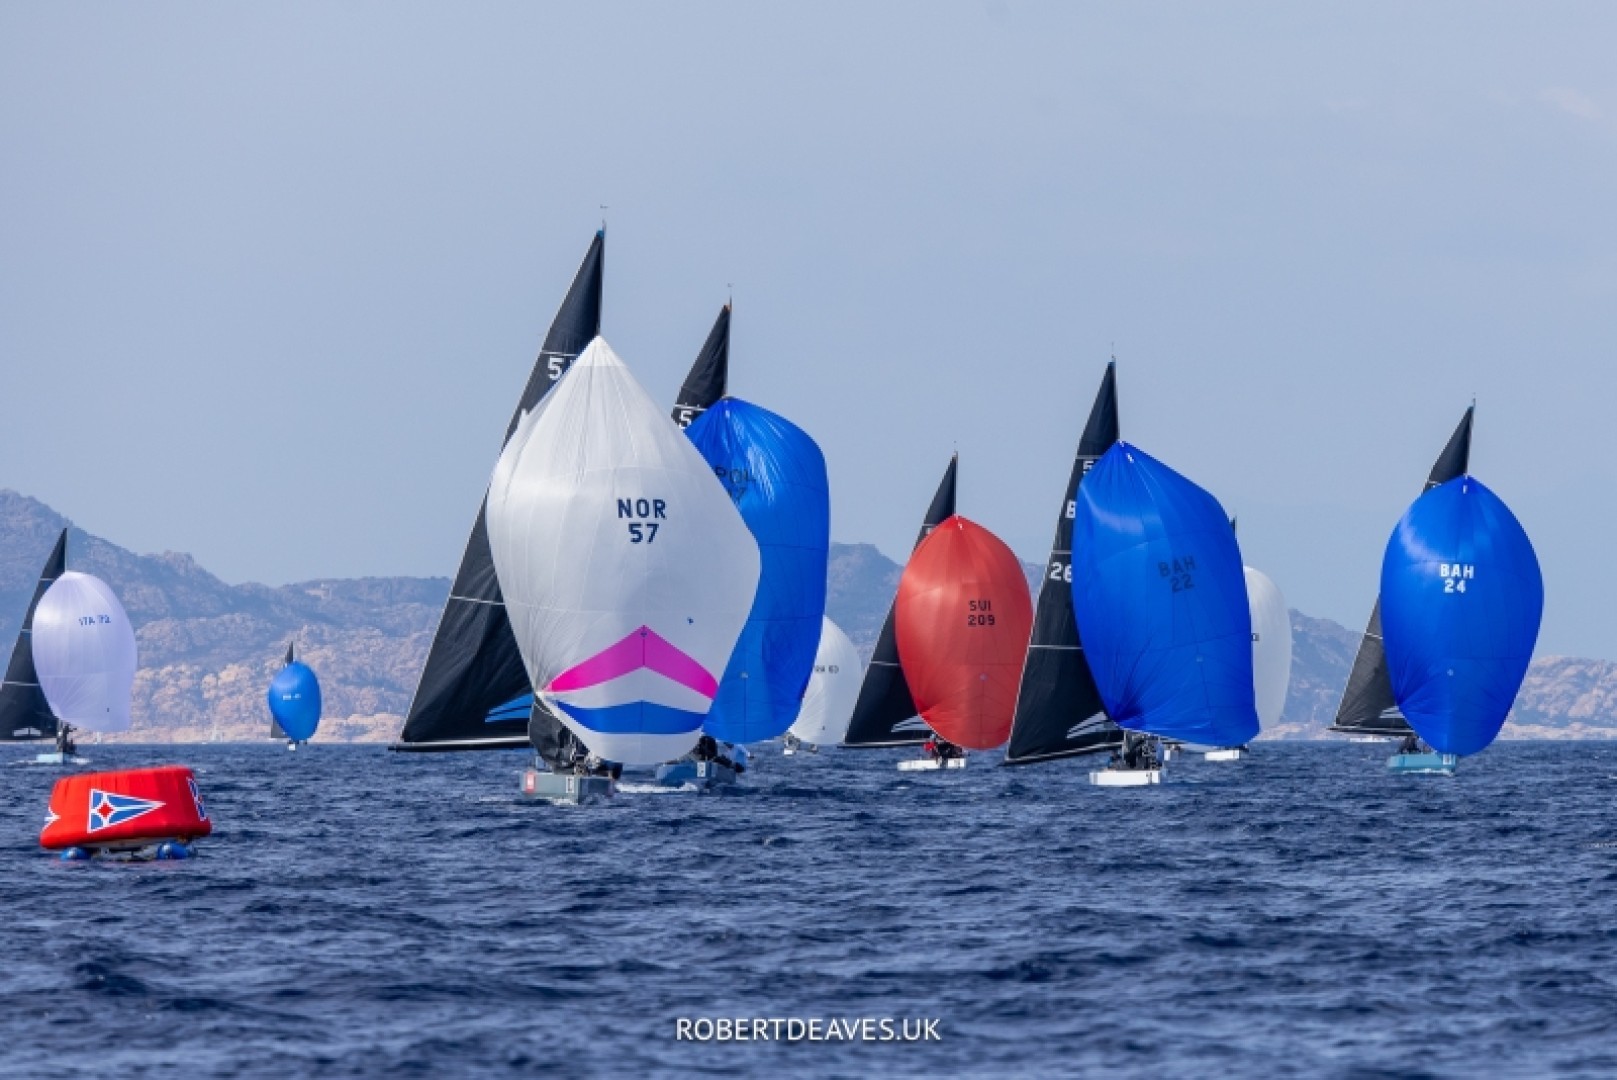 Artemis leading the fleet in the second race of the day, International 5.5 Metre Class World Championship.